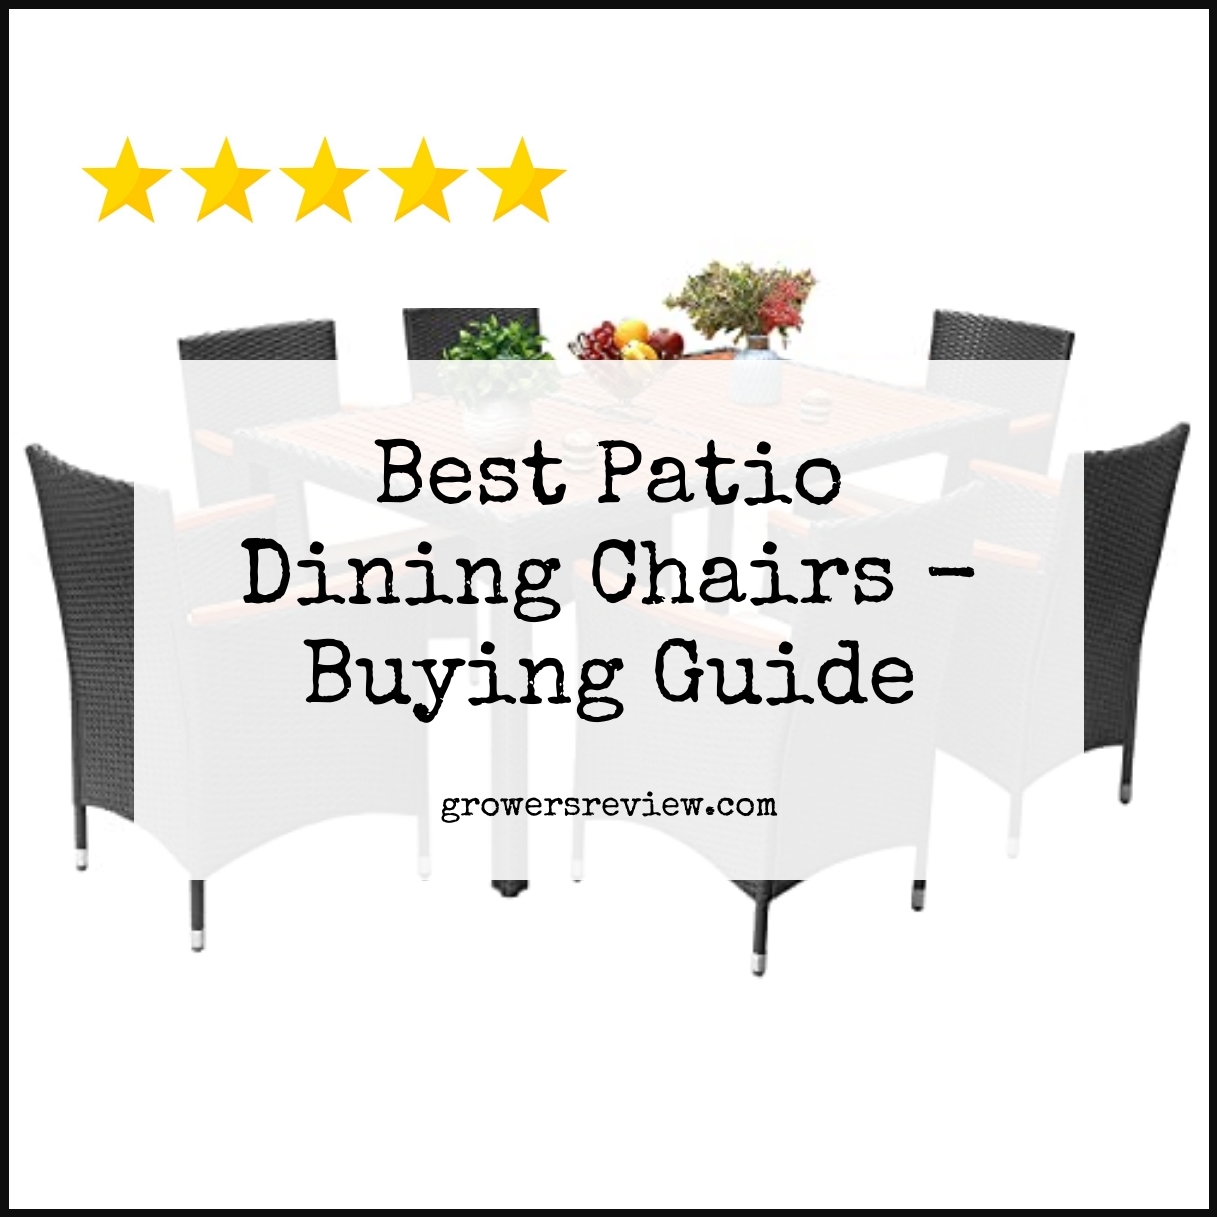 Best Patio Dining Chairs - Buying Guide